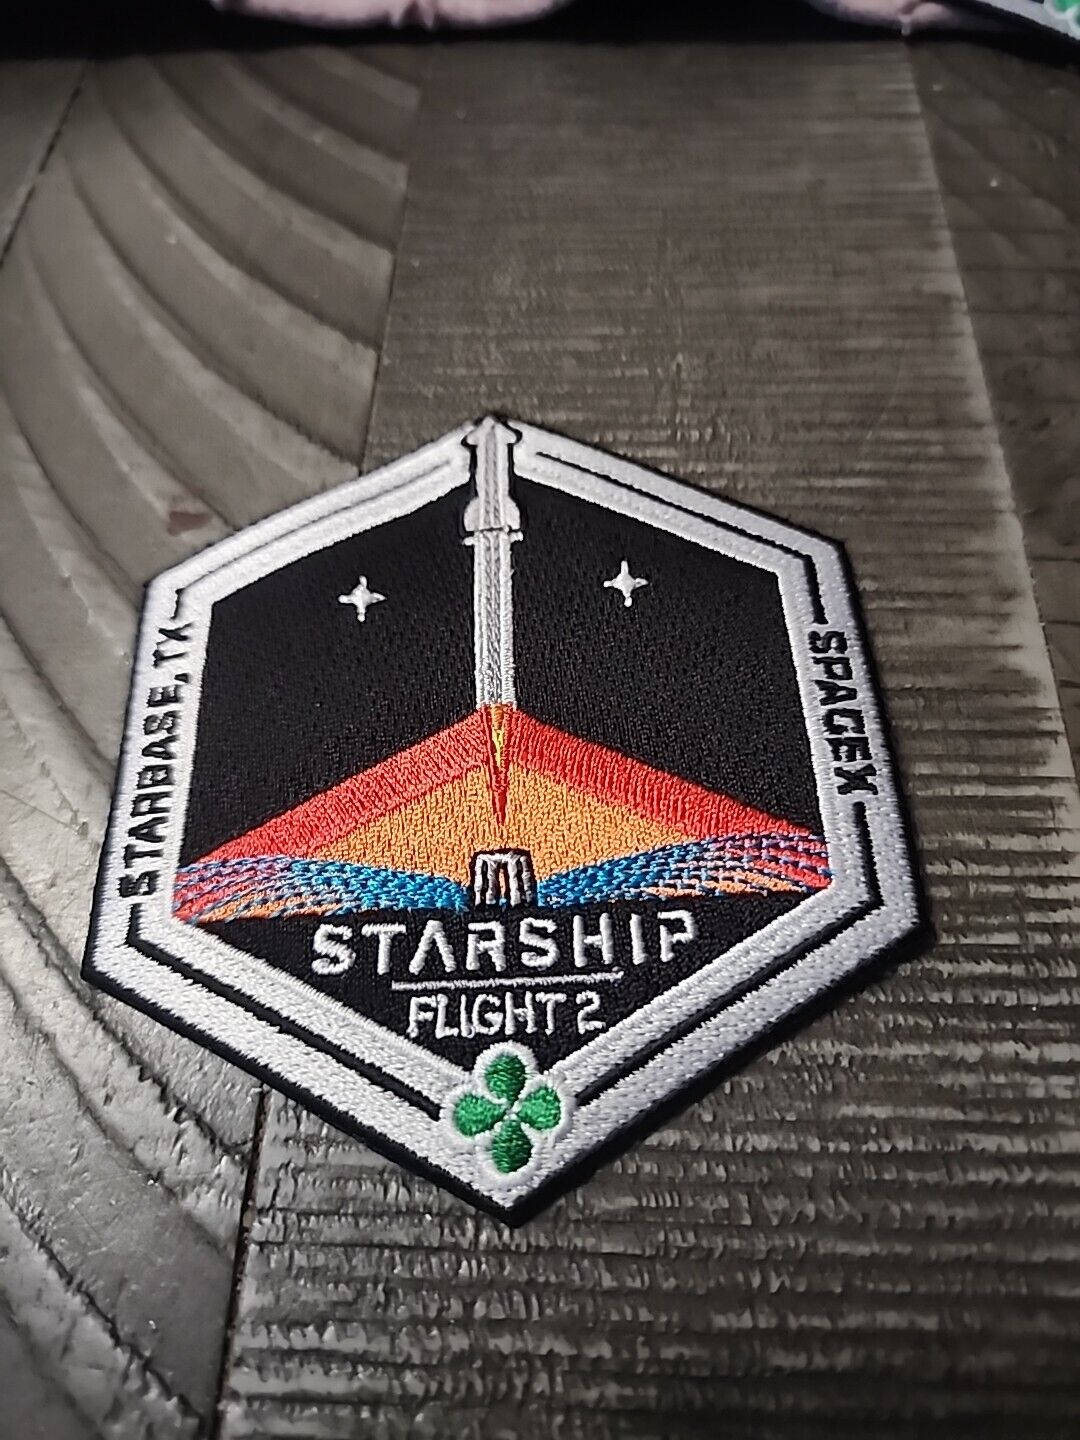 Authentic SPACEX -STARSHIP TEST 2 FLIGHT-SUPER HEAVY- STARBASE, TX- Employee 